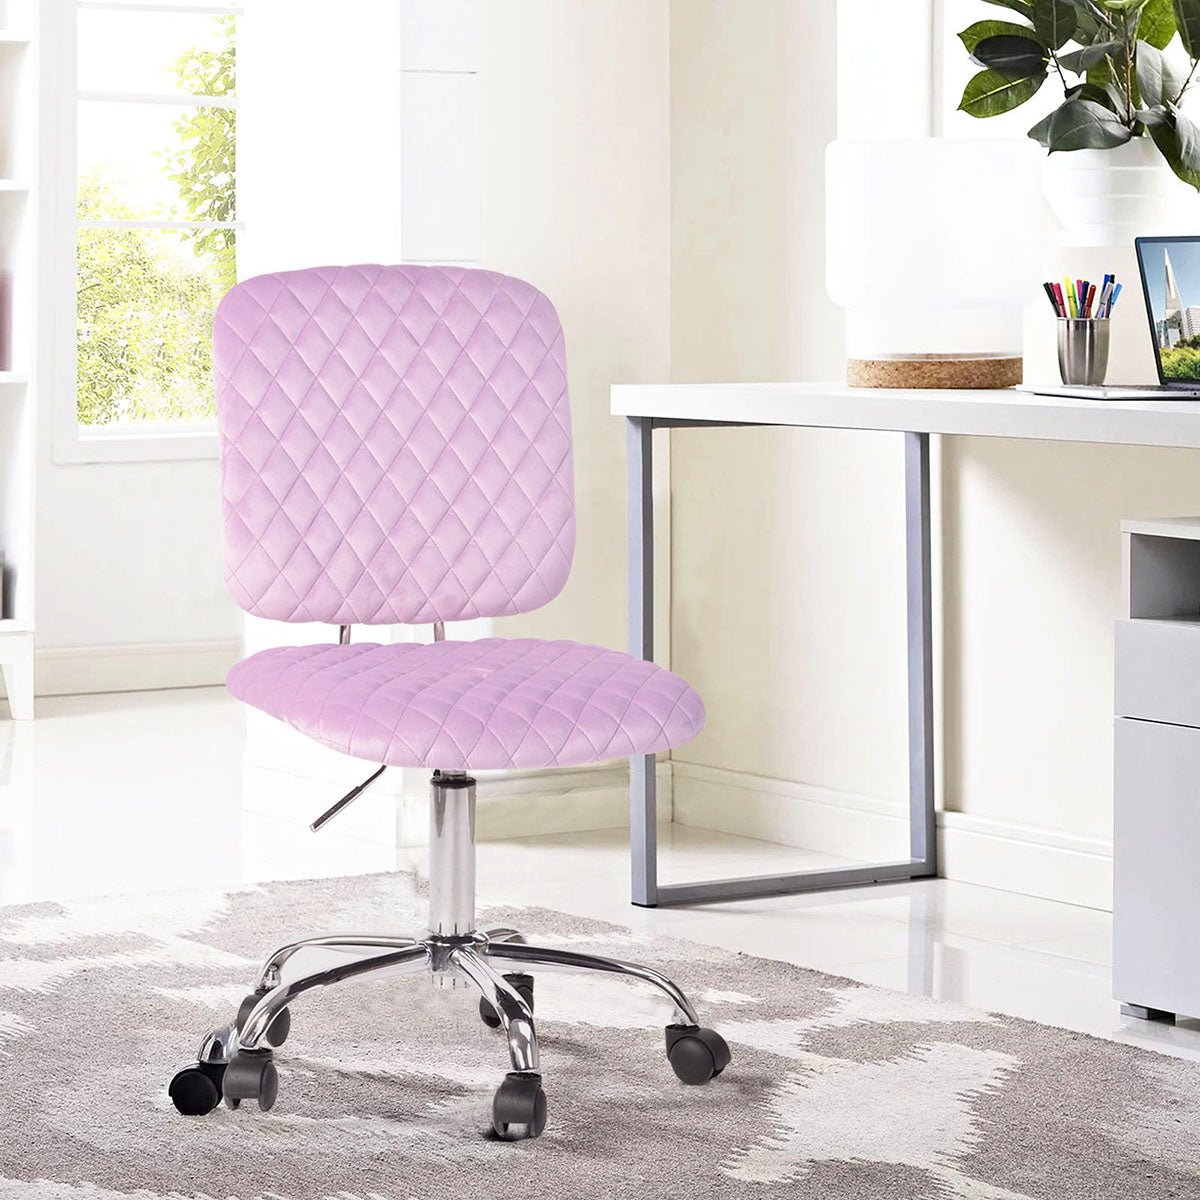 Upholstery Task Chair Home office chair - Demine Essentials